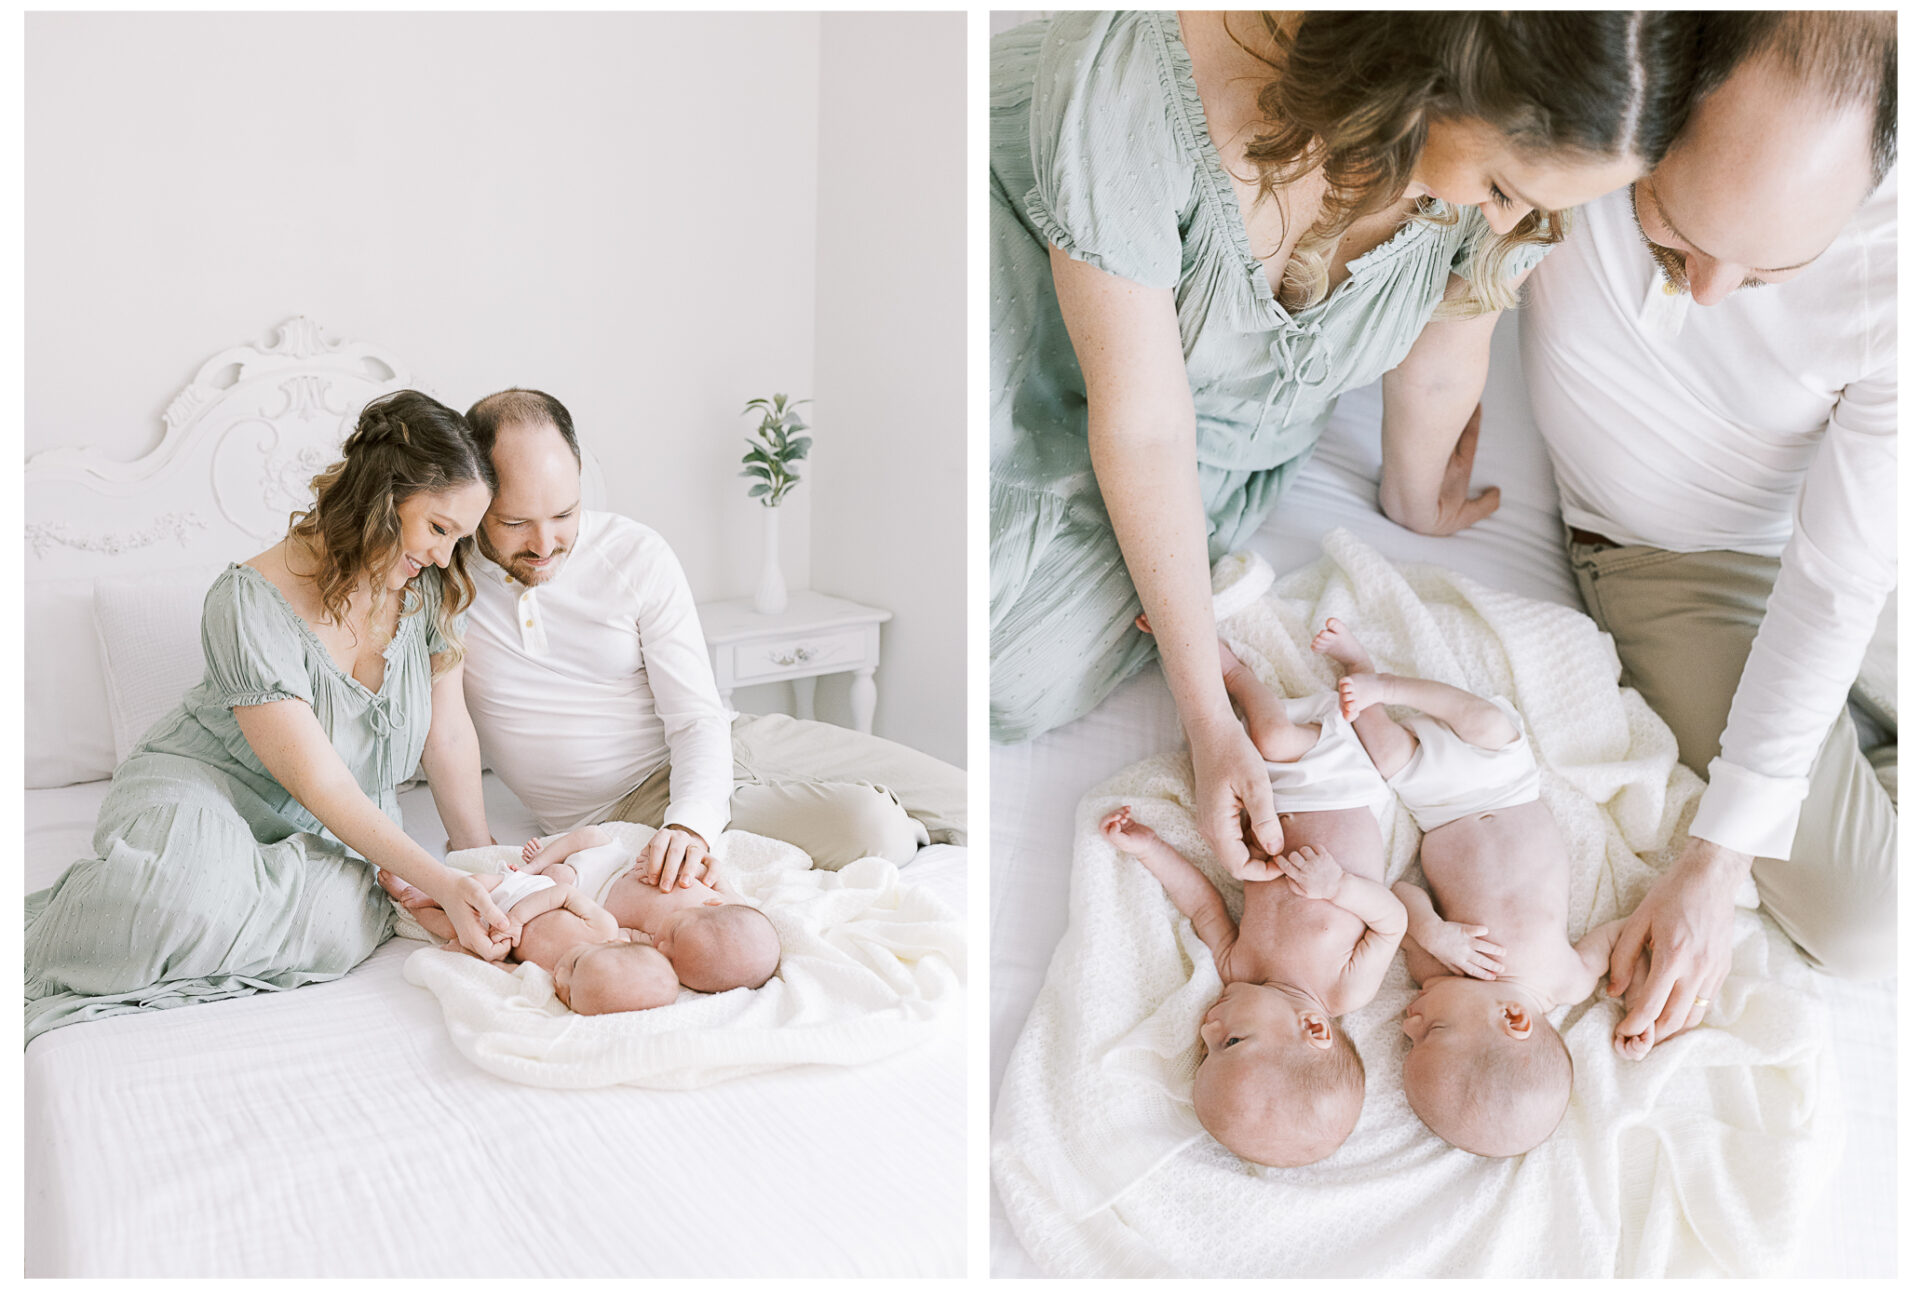 Newborn baby boy photography session | Baby brothers snuggling with their mother and father